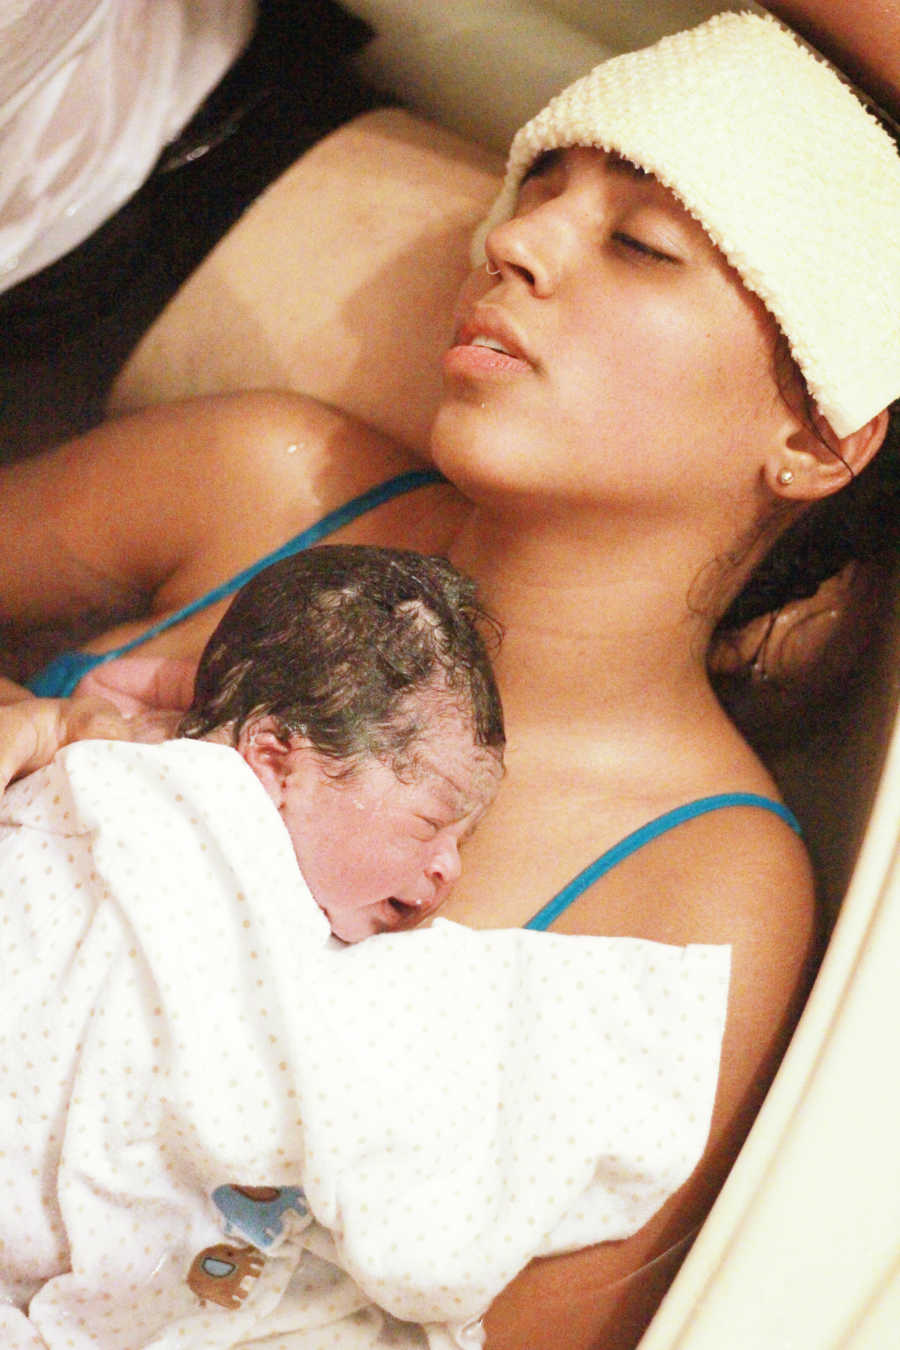 Woman who just had water birth lies with newborn swaddled in a towel to her chest with towel over her head